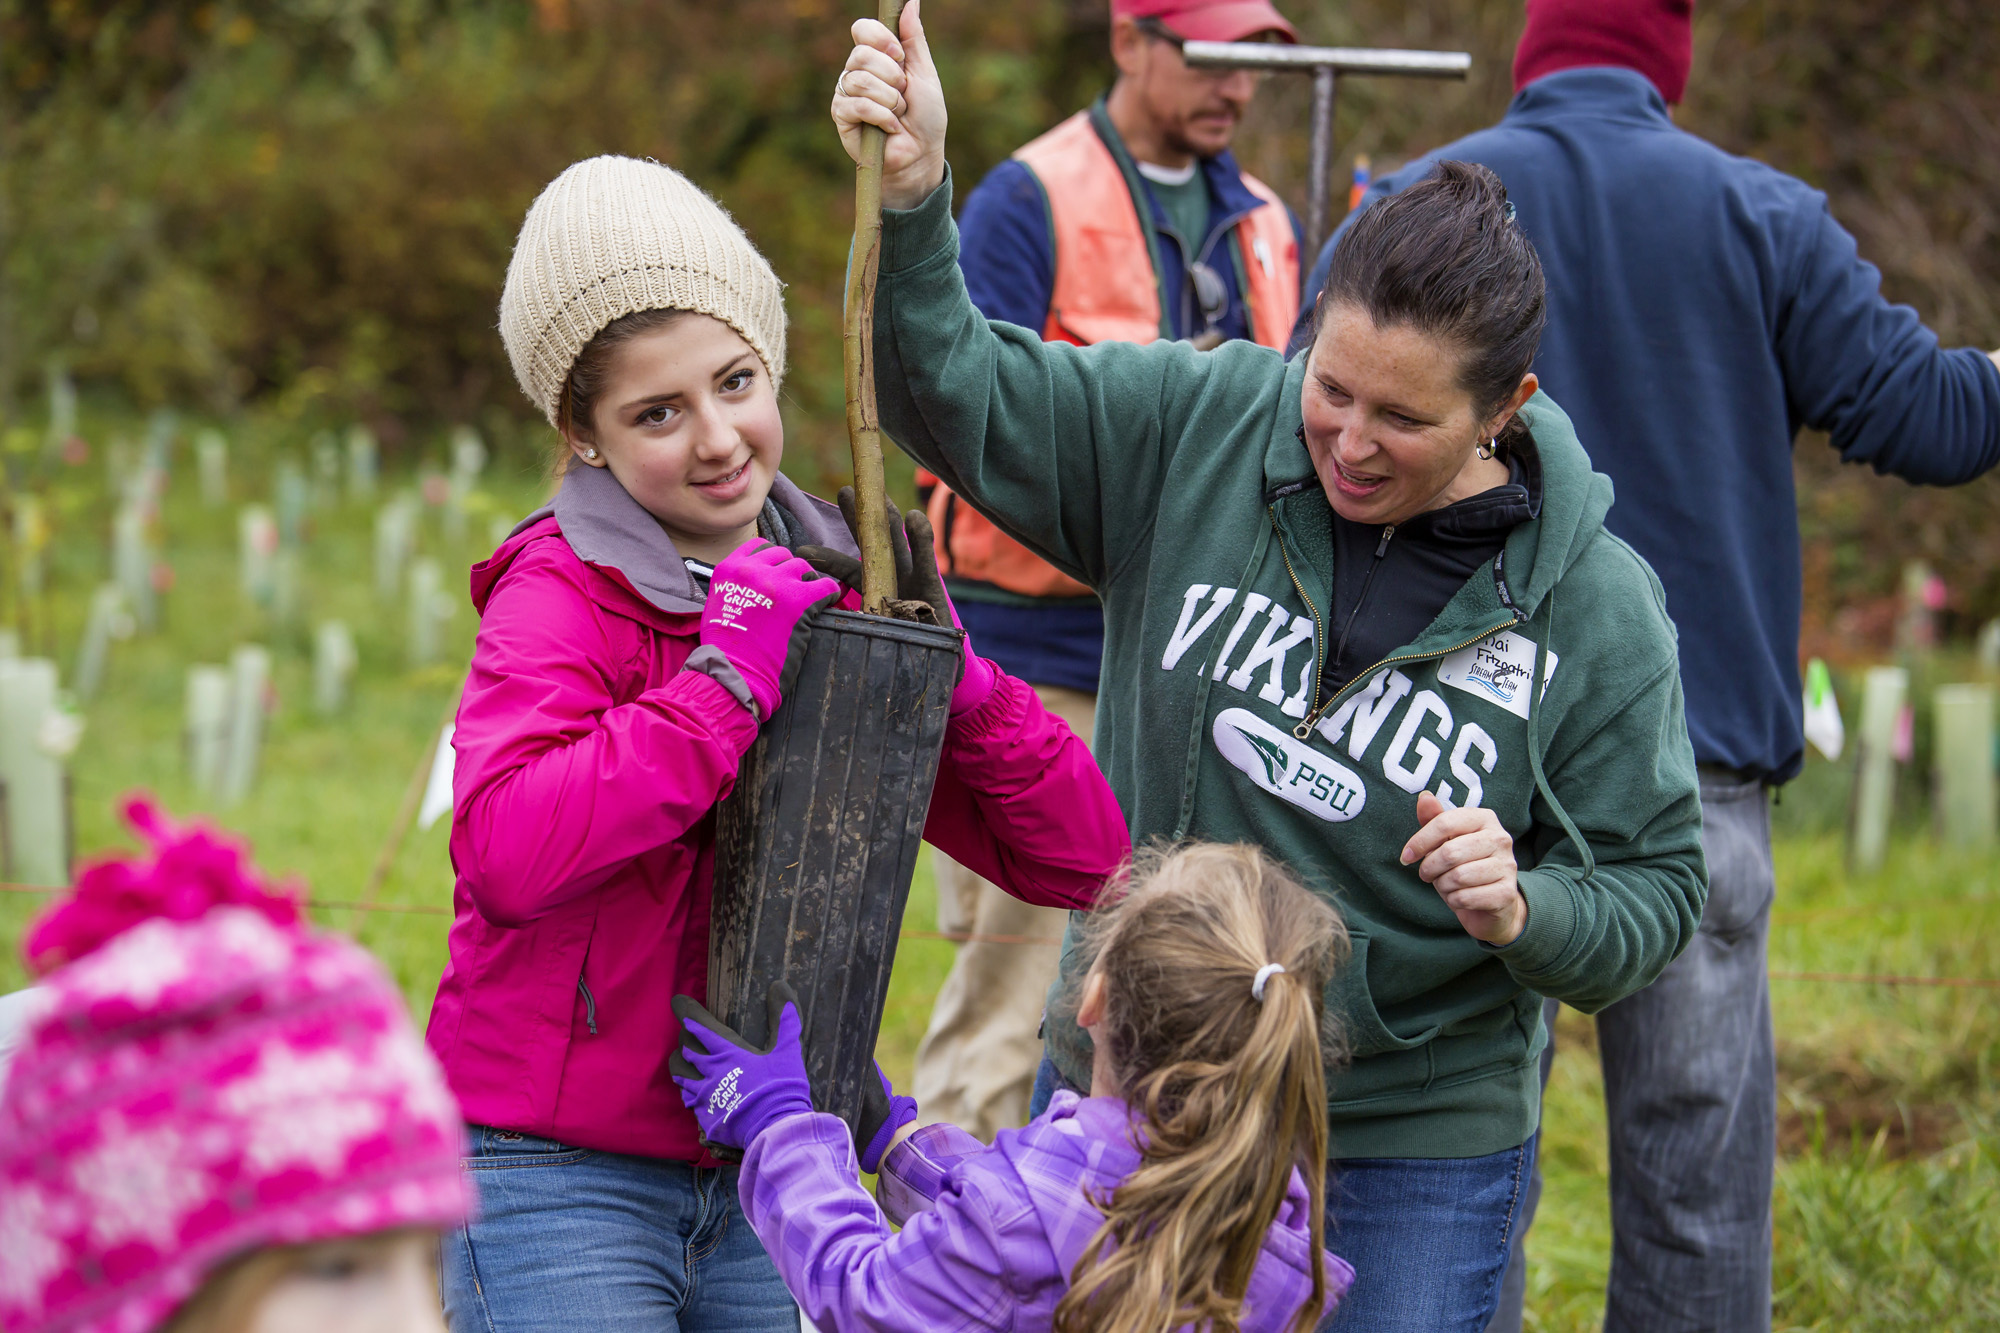 More than 200 volunteers helped Clark Public Utilities' StreamTeam plant 1,013 trees during the Make a Difference Day event at Washington State University Vancouver in 2013.